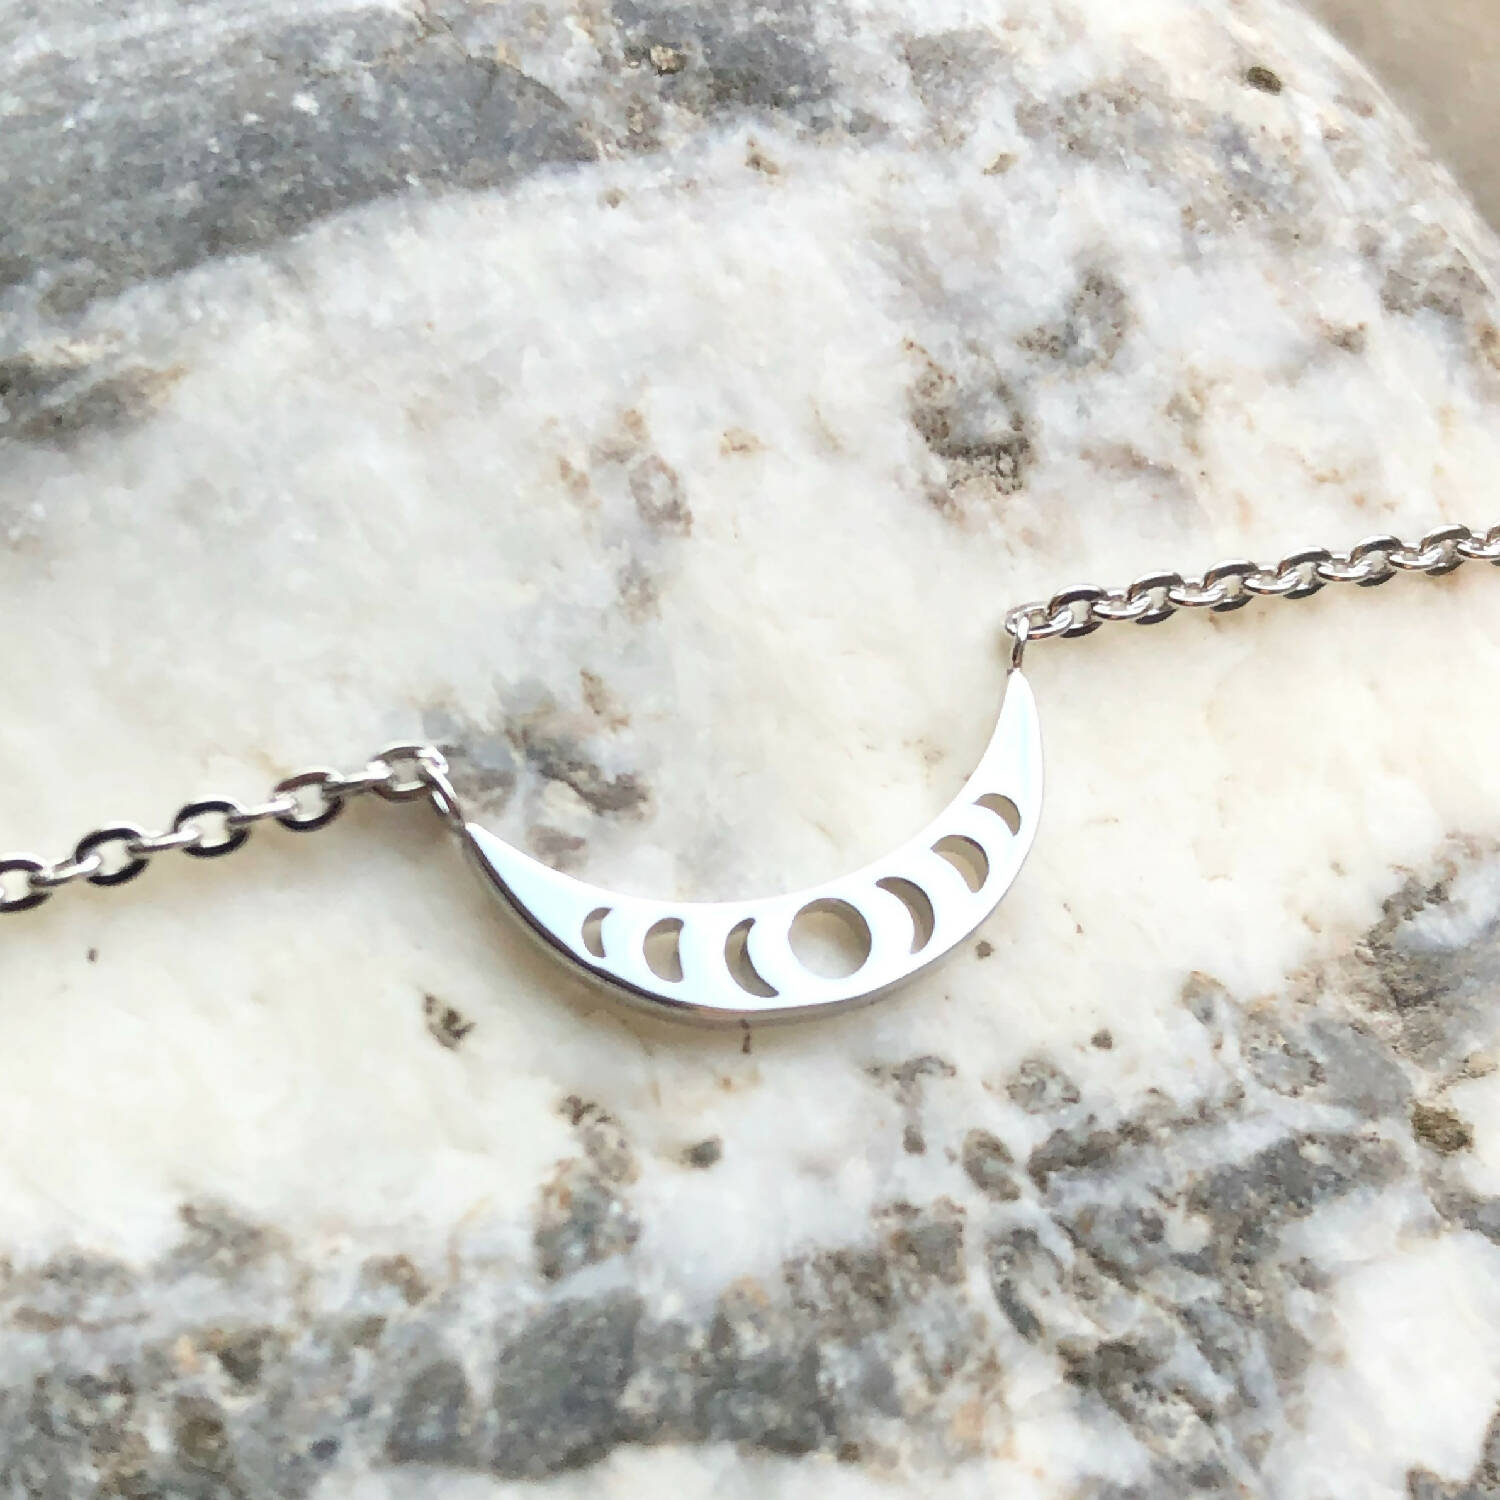 Stainless steel Crescent Moon with Moon Phases necklace